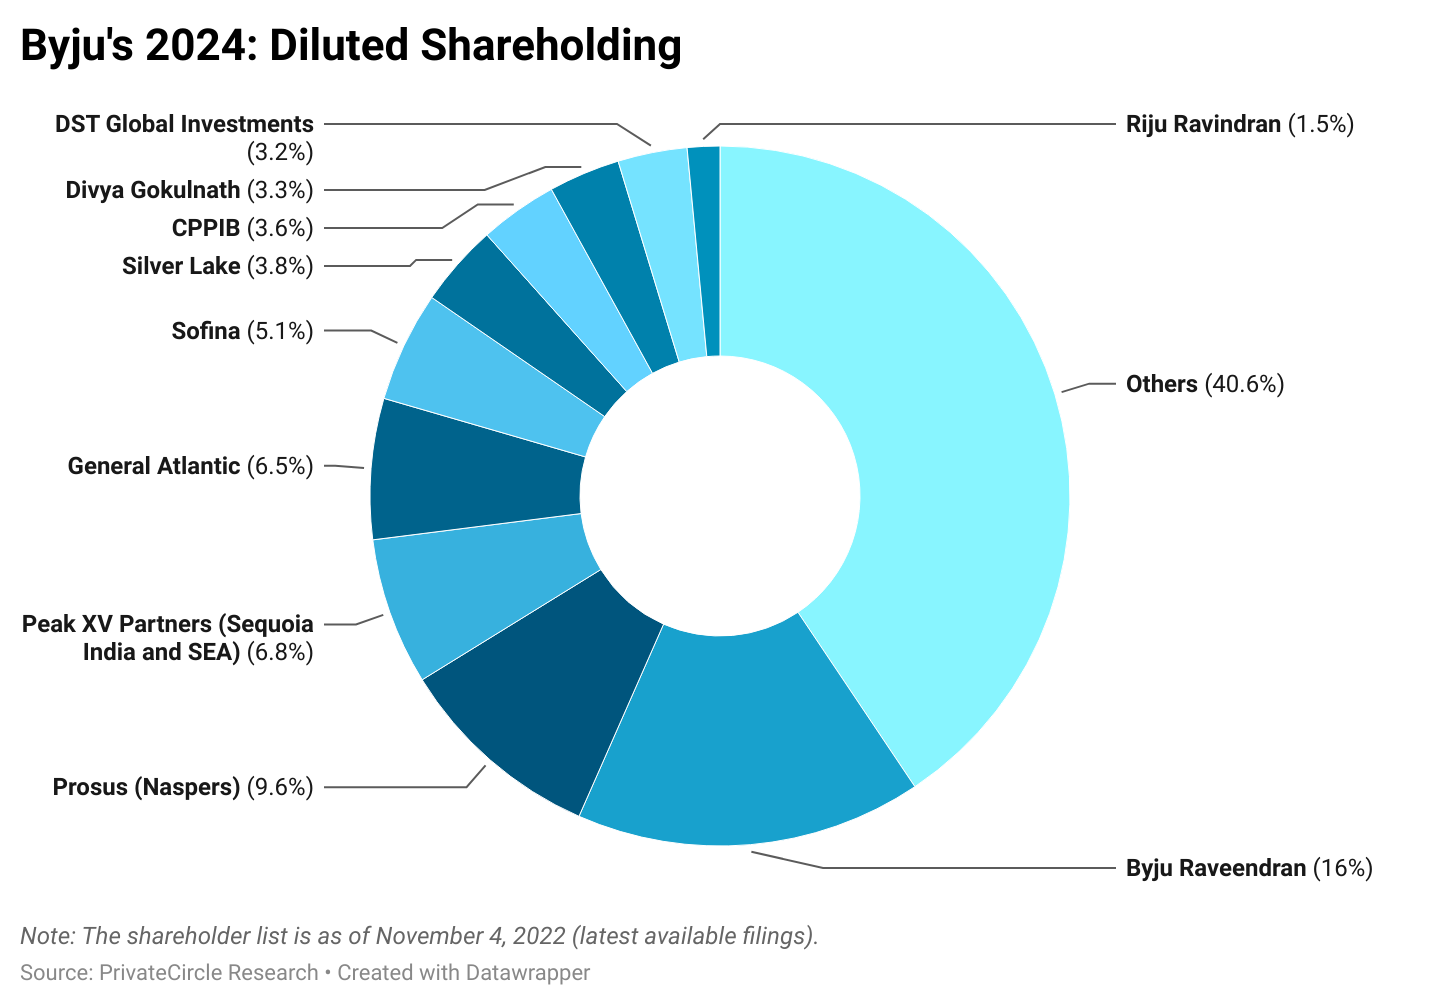 Byju's 2024: Diluted Shareholding.

Promoters Byju Raveendran, Divya Gokulnath and Riju Ravindran together hold around 21% stake in Byju's. The second largest shareholder is Prosus (Naspers) with a 9.6% stake in the edtech company.